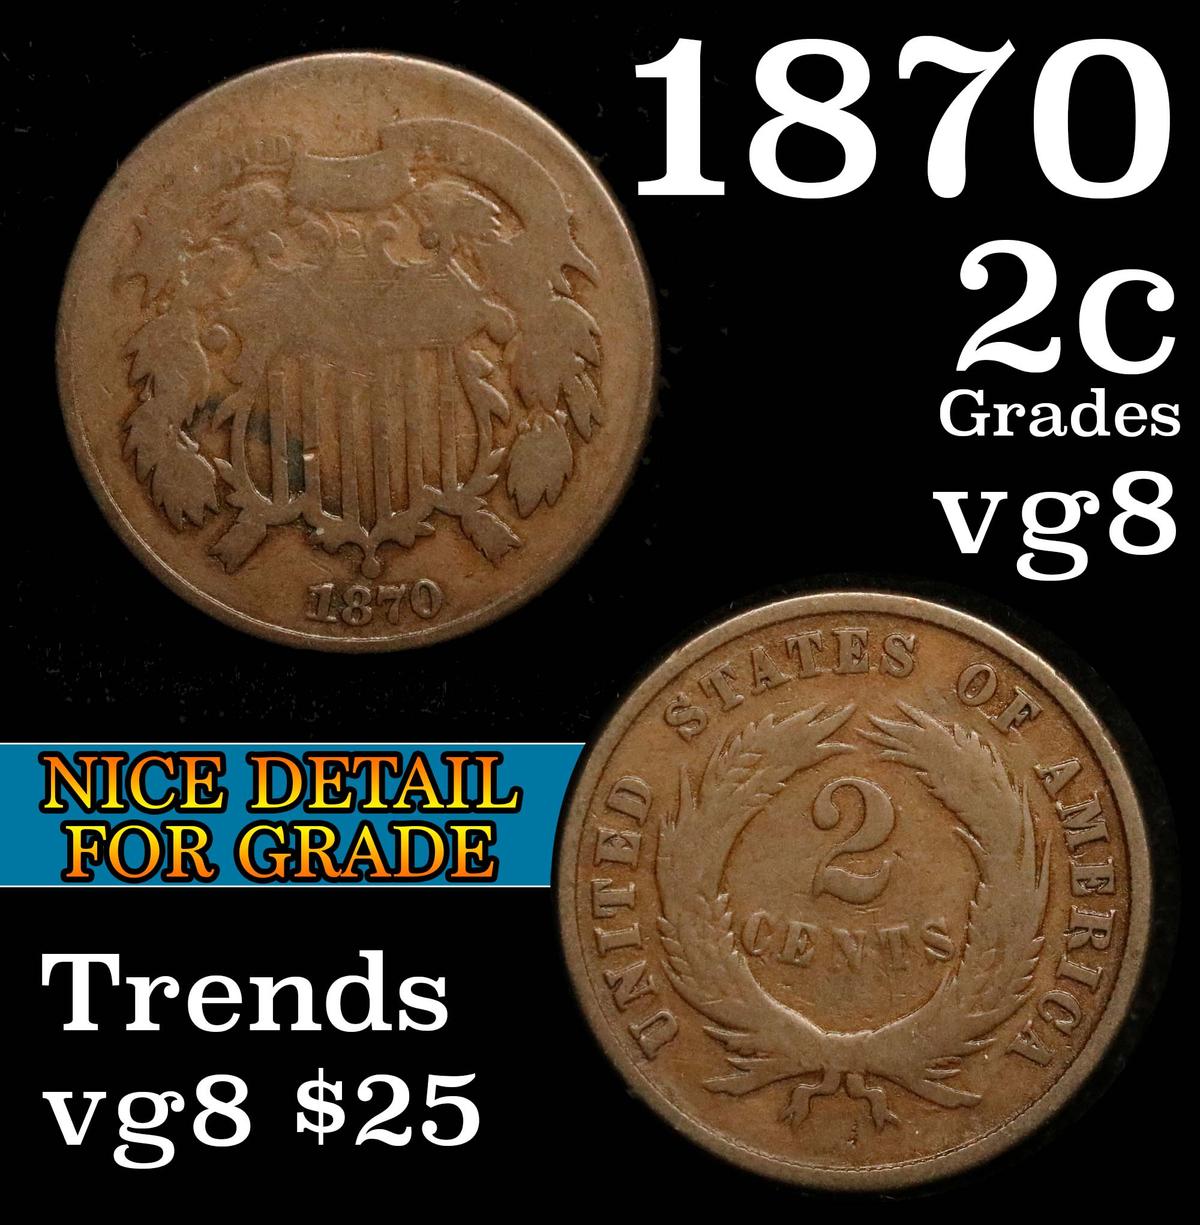 1870 Two Cent Piece 2c Grades vg, very good